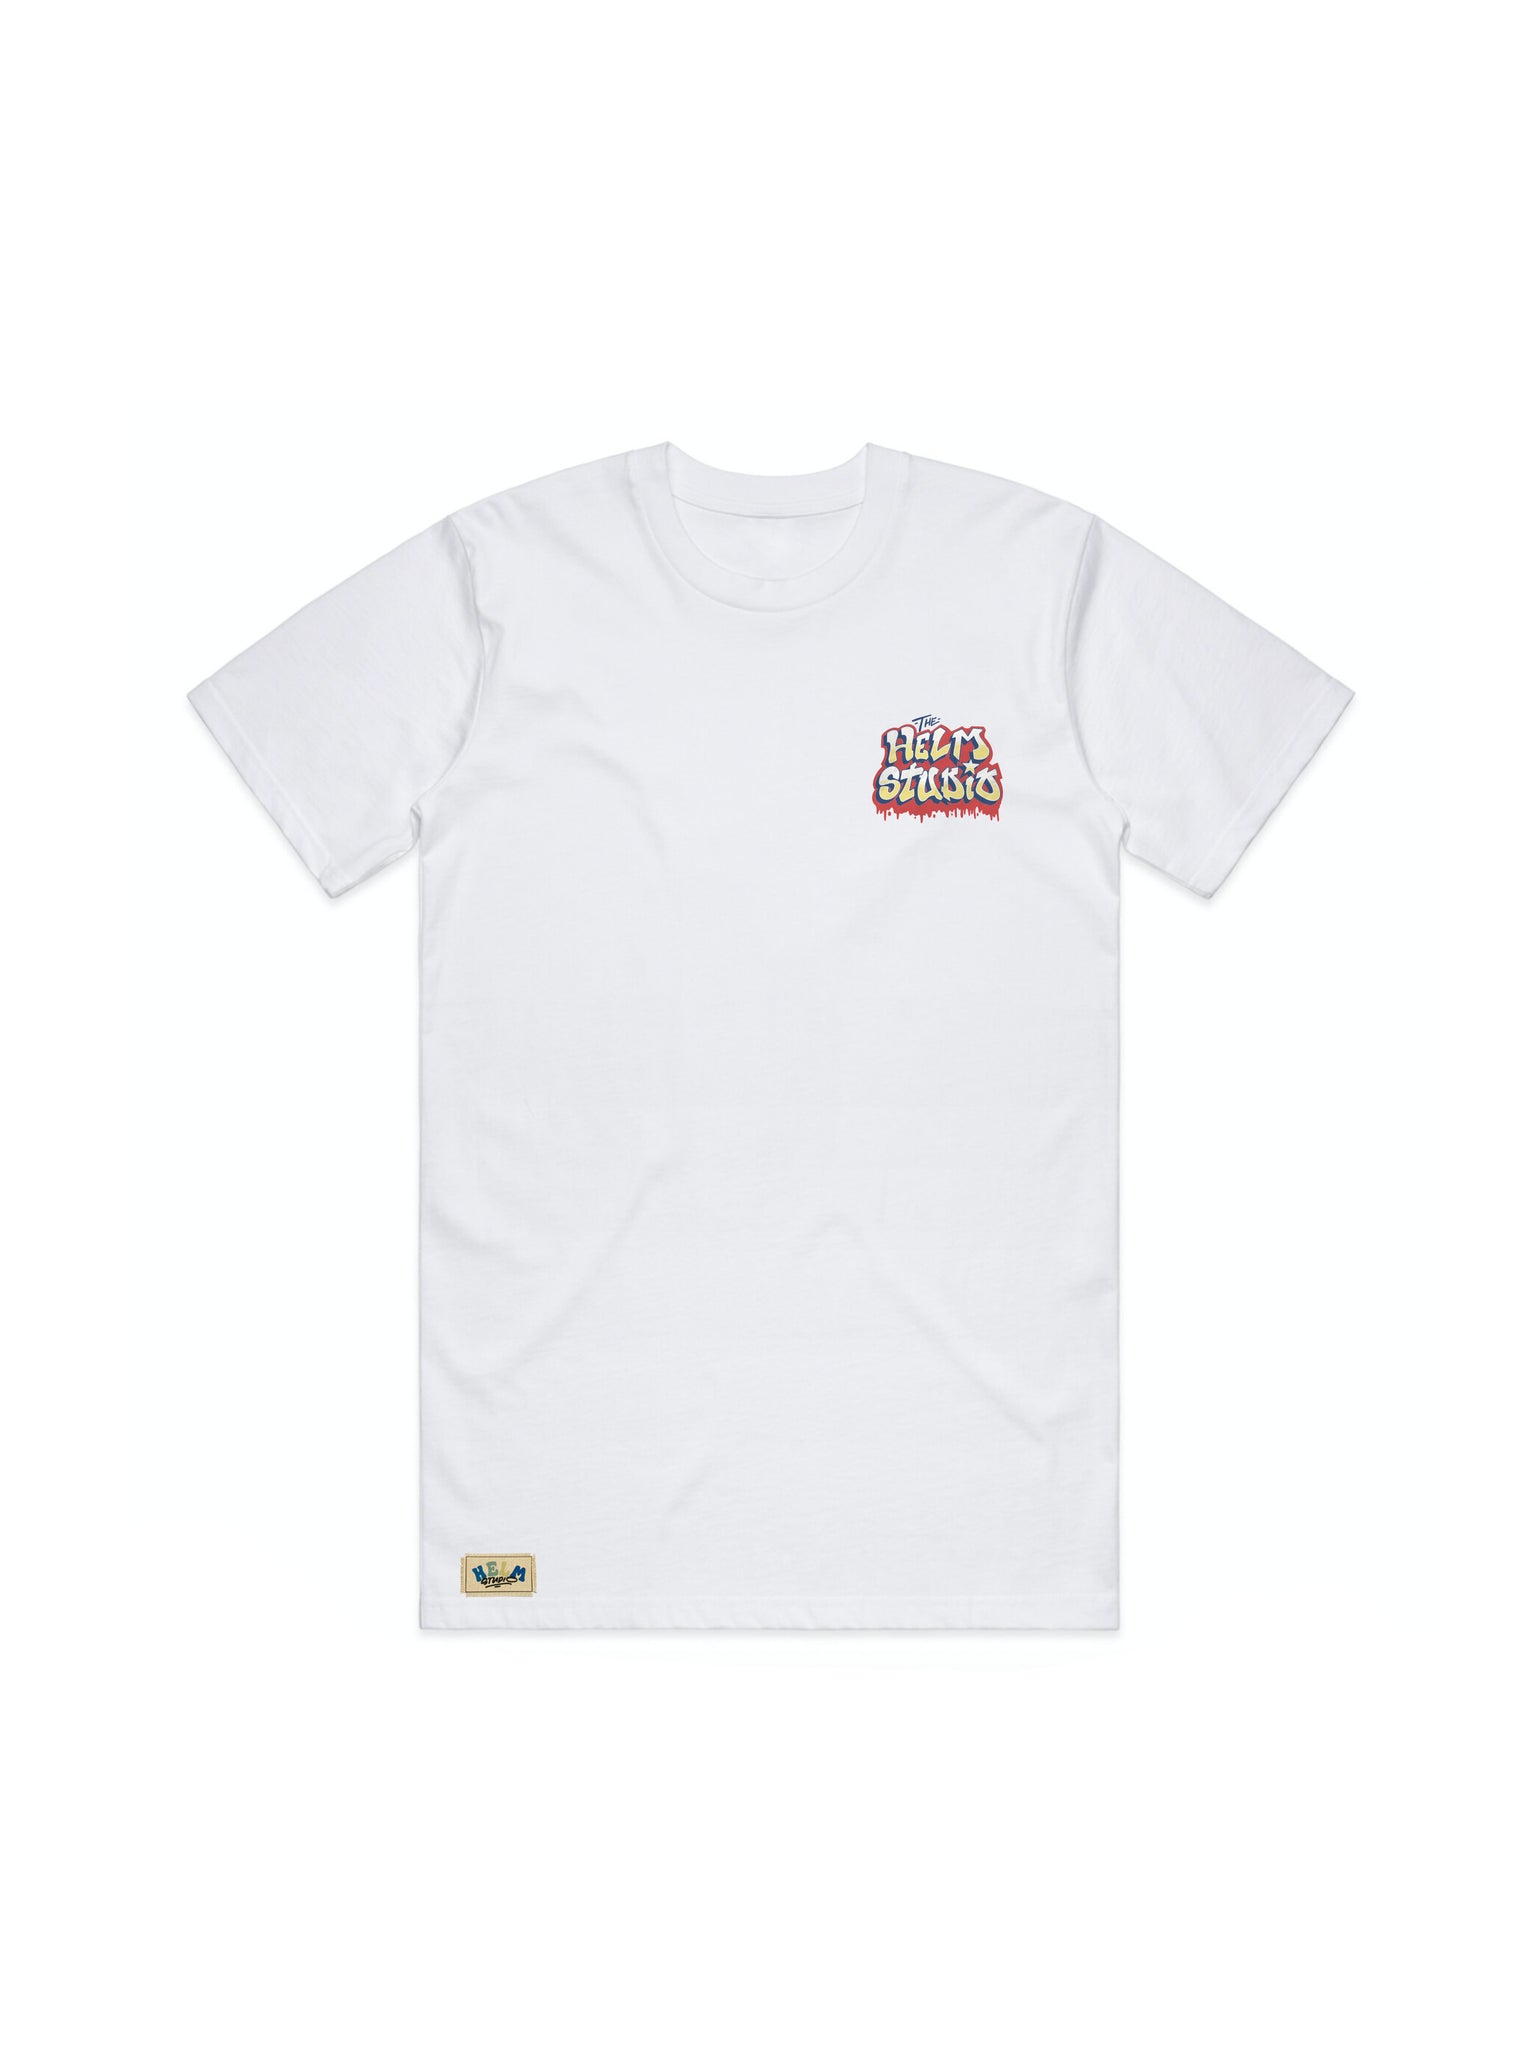 Washington Wizards G-Wiz T-Shirt from Homage. | Ash | Vintage Apparel from Homage.